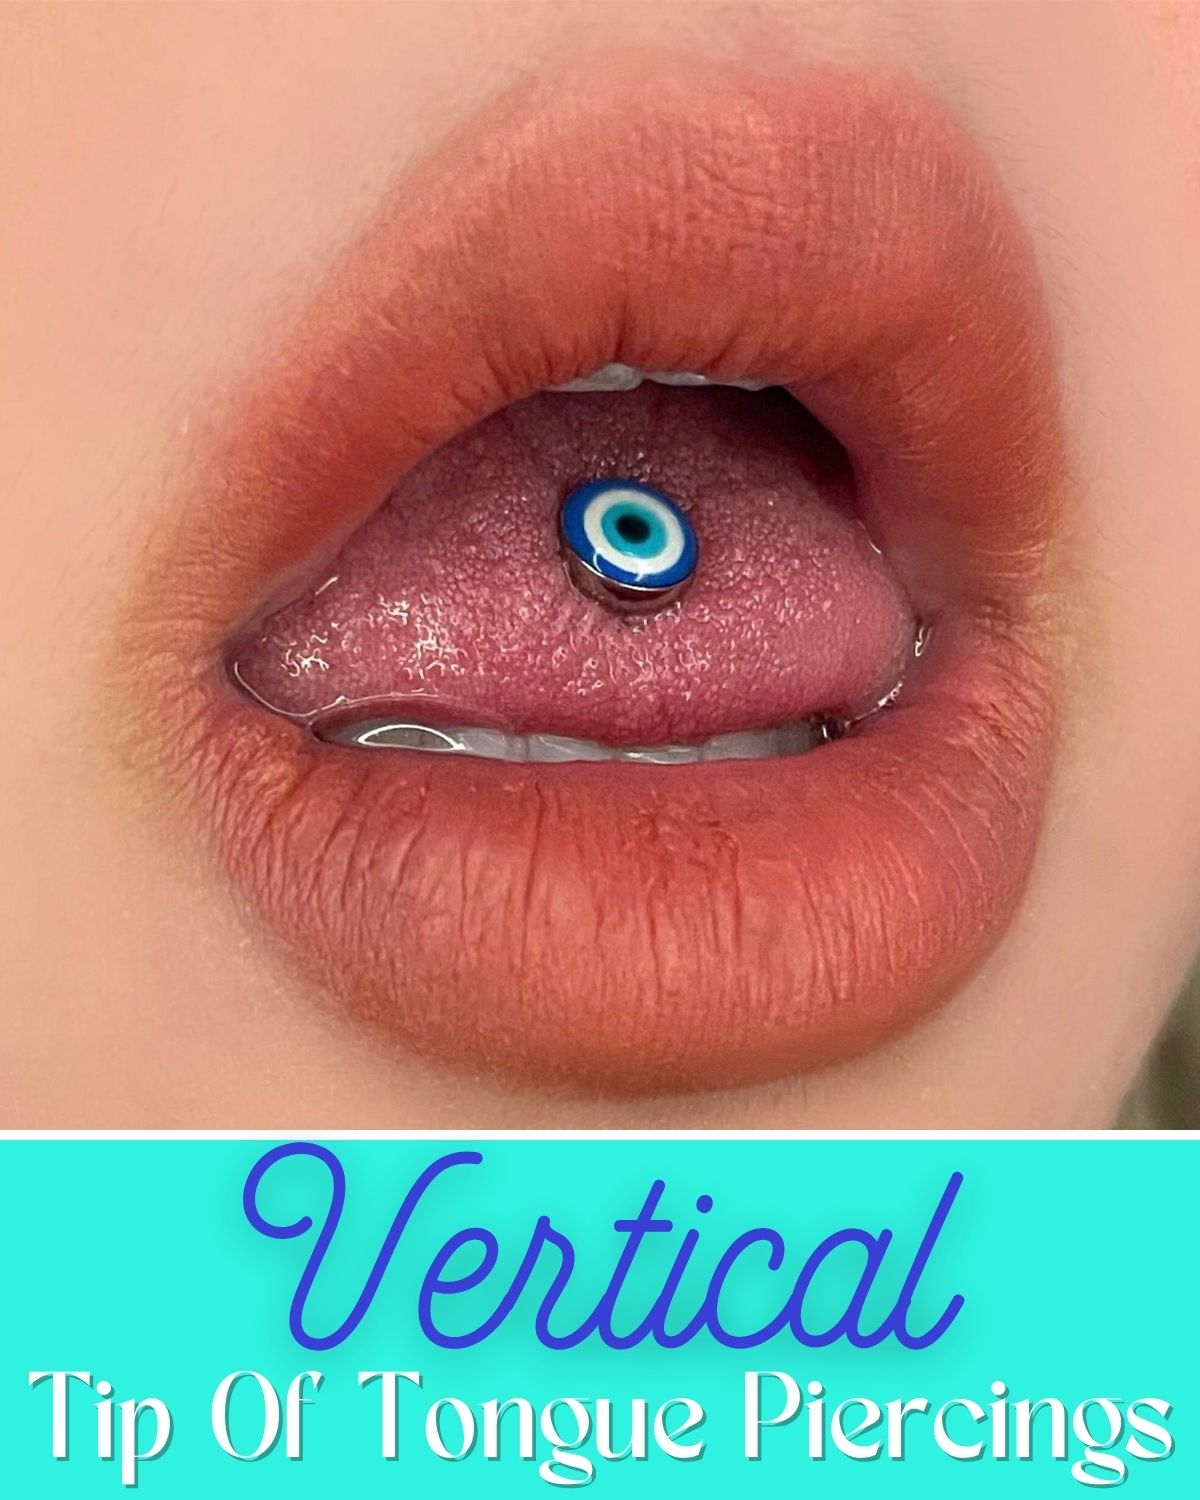 A vertical tongue piercing with an evil eye stud